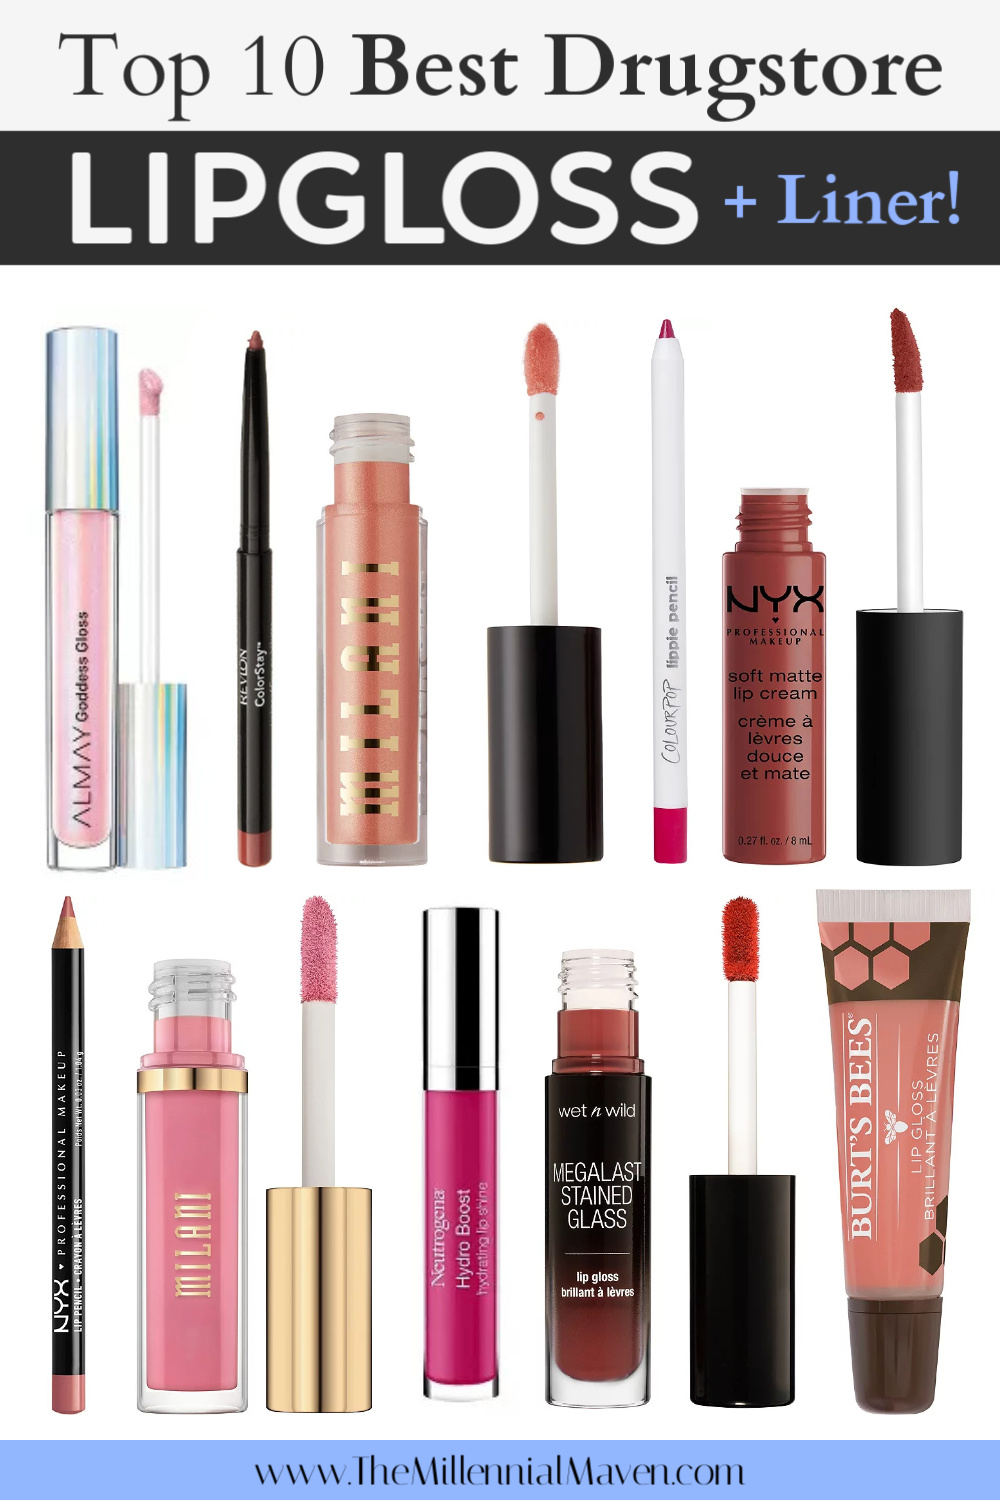 Top 10 Best Lipglosses + Lipliners at the Drugstore in 2021! | Best Drugstore Lipgloss